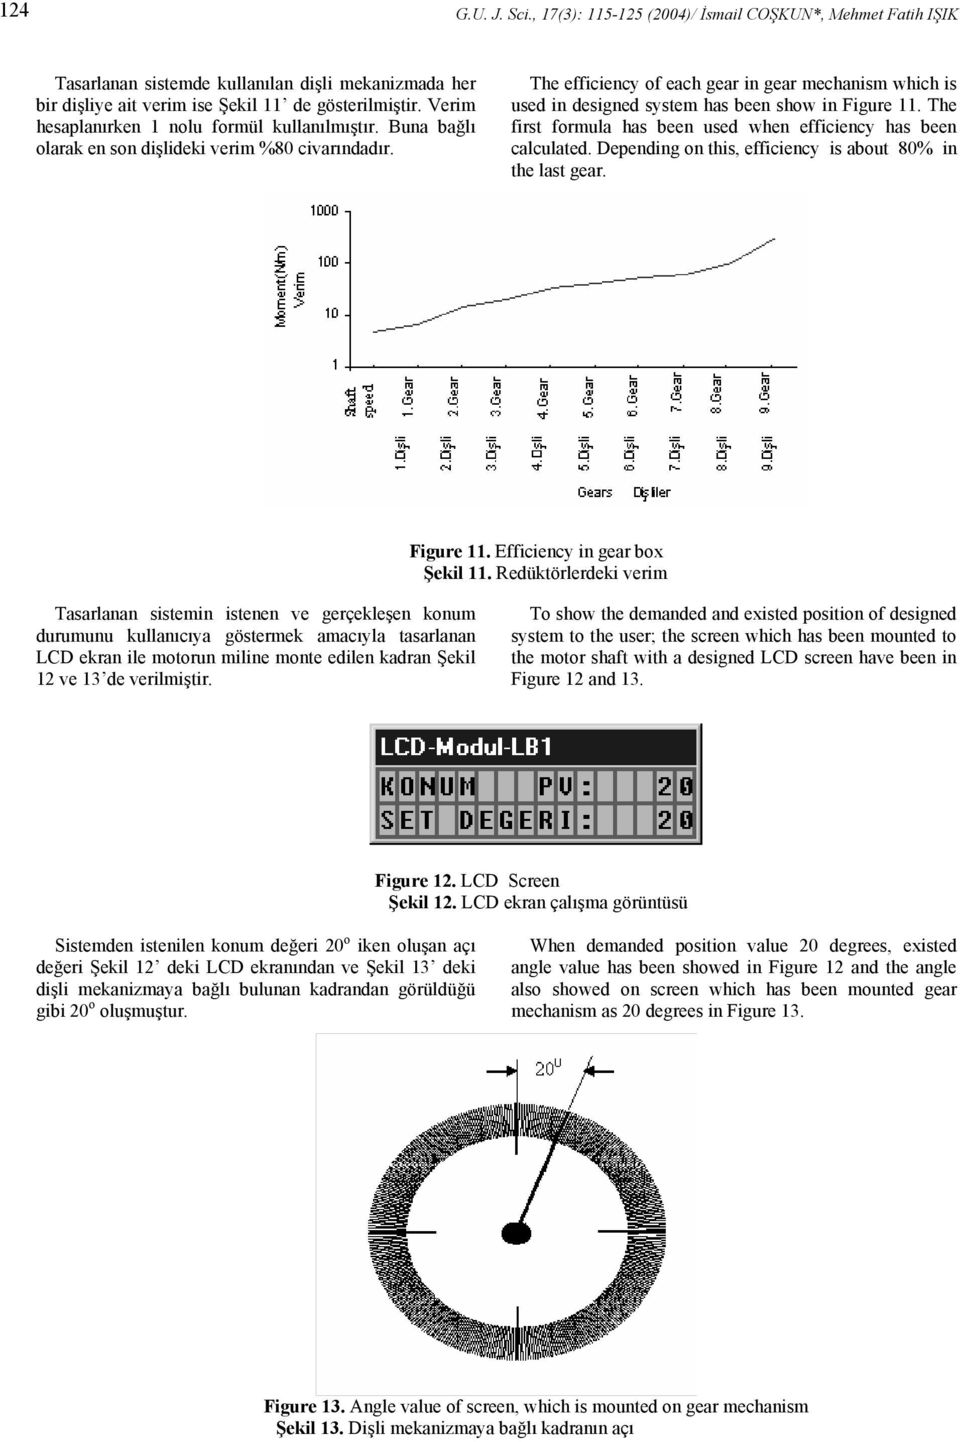 The efficiency of each gear in gear mechanism which is used in designed system has been show in Figure 11. The first formula has been used when efficiency has been calculated.